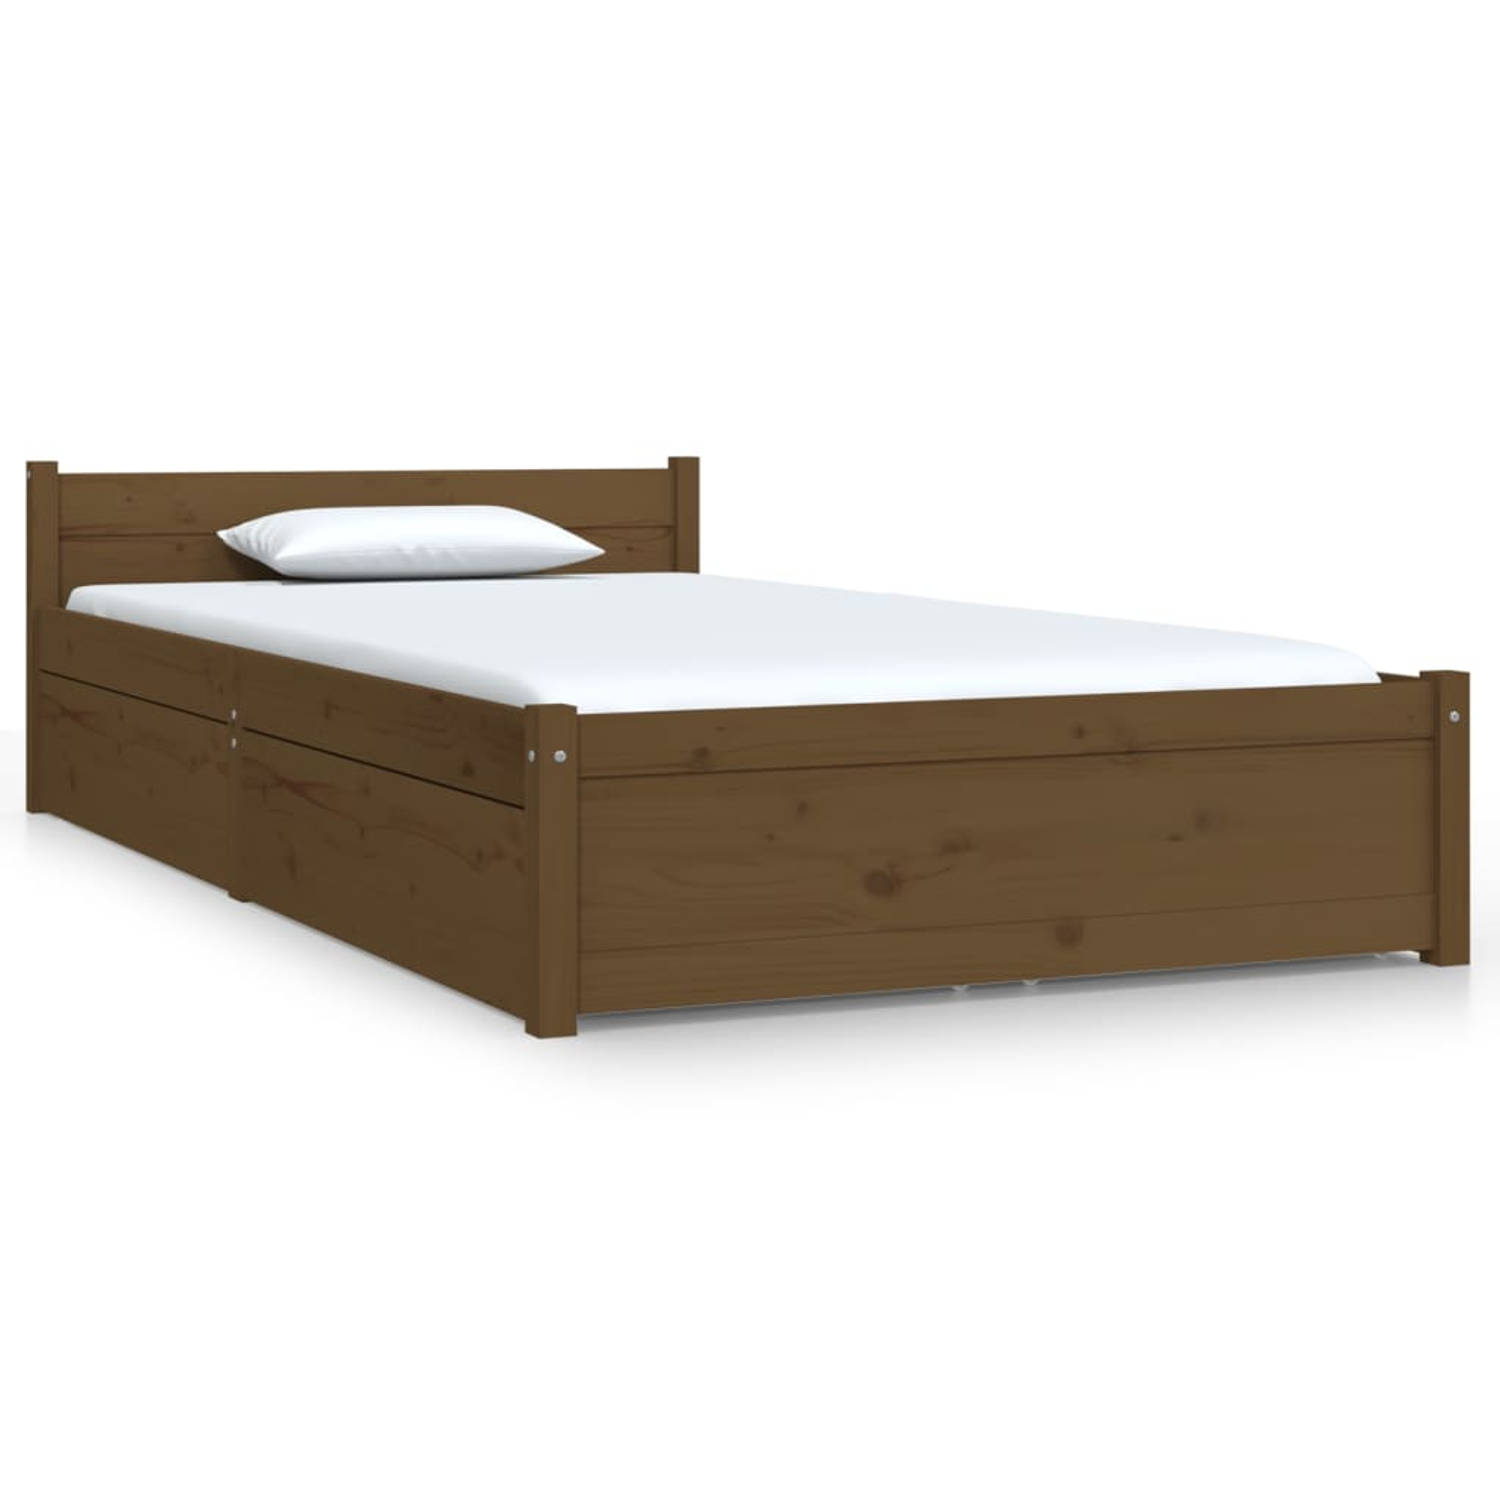 The Living Store Bedframe met lades honingbruin 90x200 cm - Bedframe - Bedframes - Eenpersoonsbed - Bed - Bedombouw - Ledikant - Pallet Bedframe - Ledikant - Eenpersoonsbedden - Be